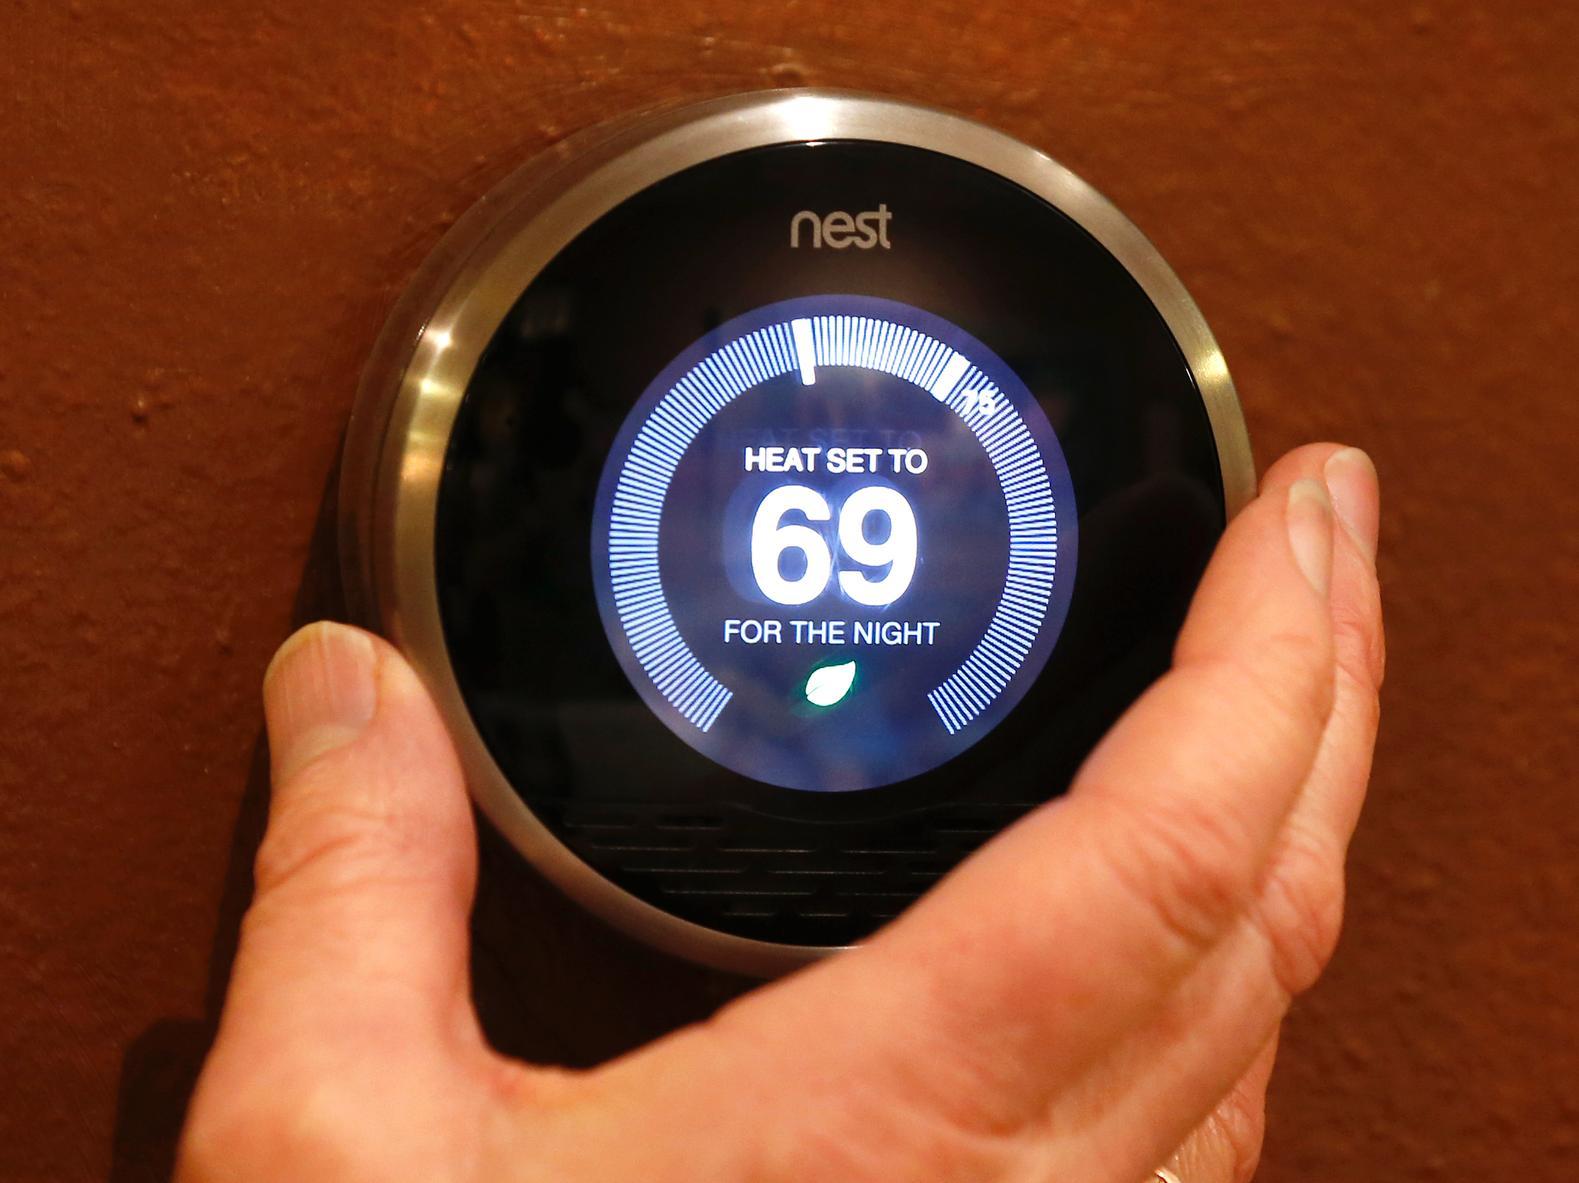 A gadget that still seemed space-age at the beginning of the decade, Nest brought the power of smart, app-controlled heating to everyone. With an easy-to-use interface and stylish product design.